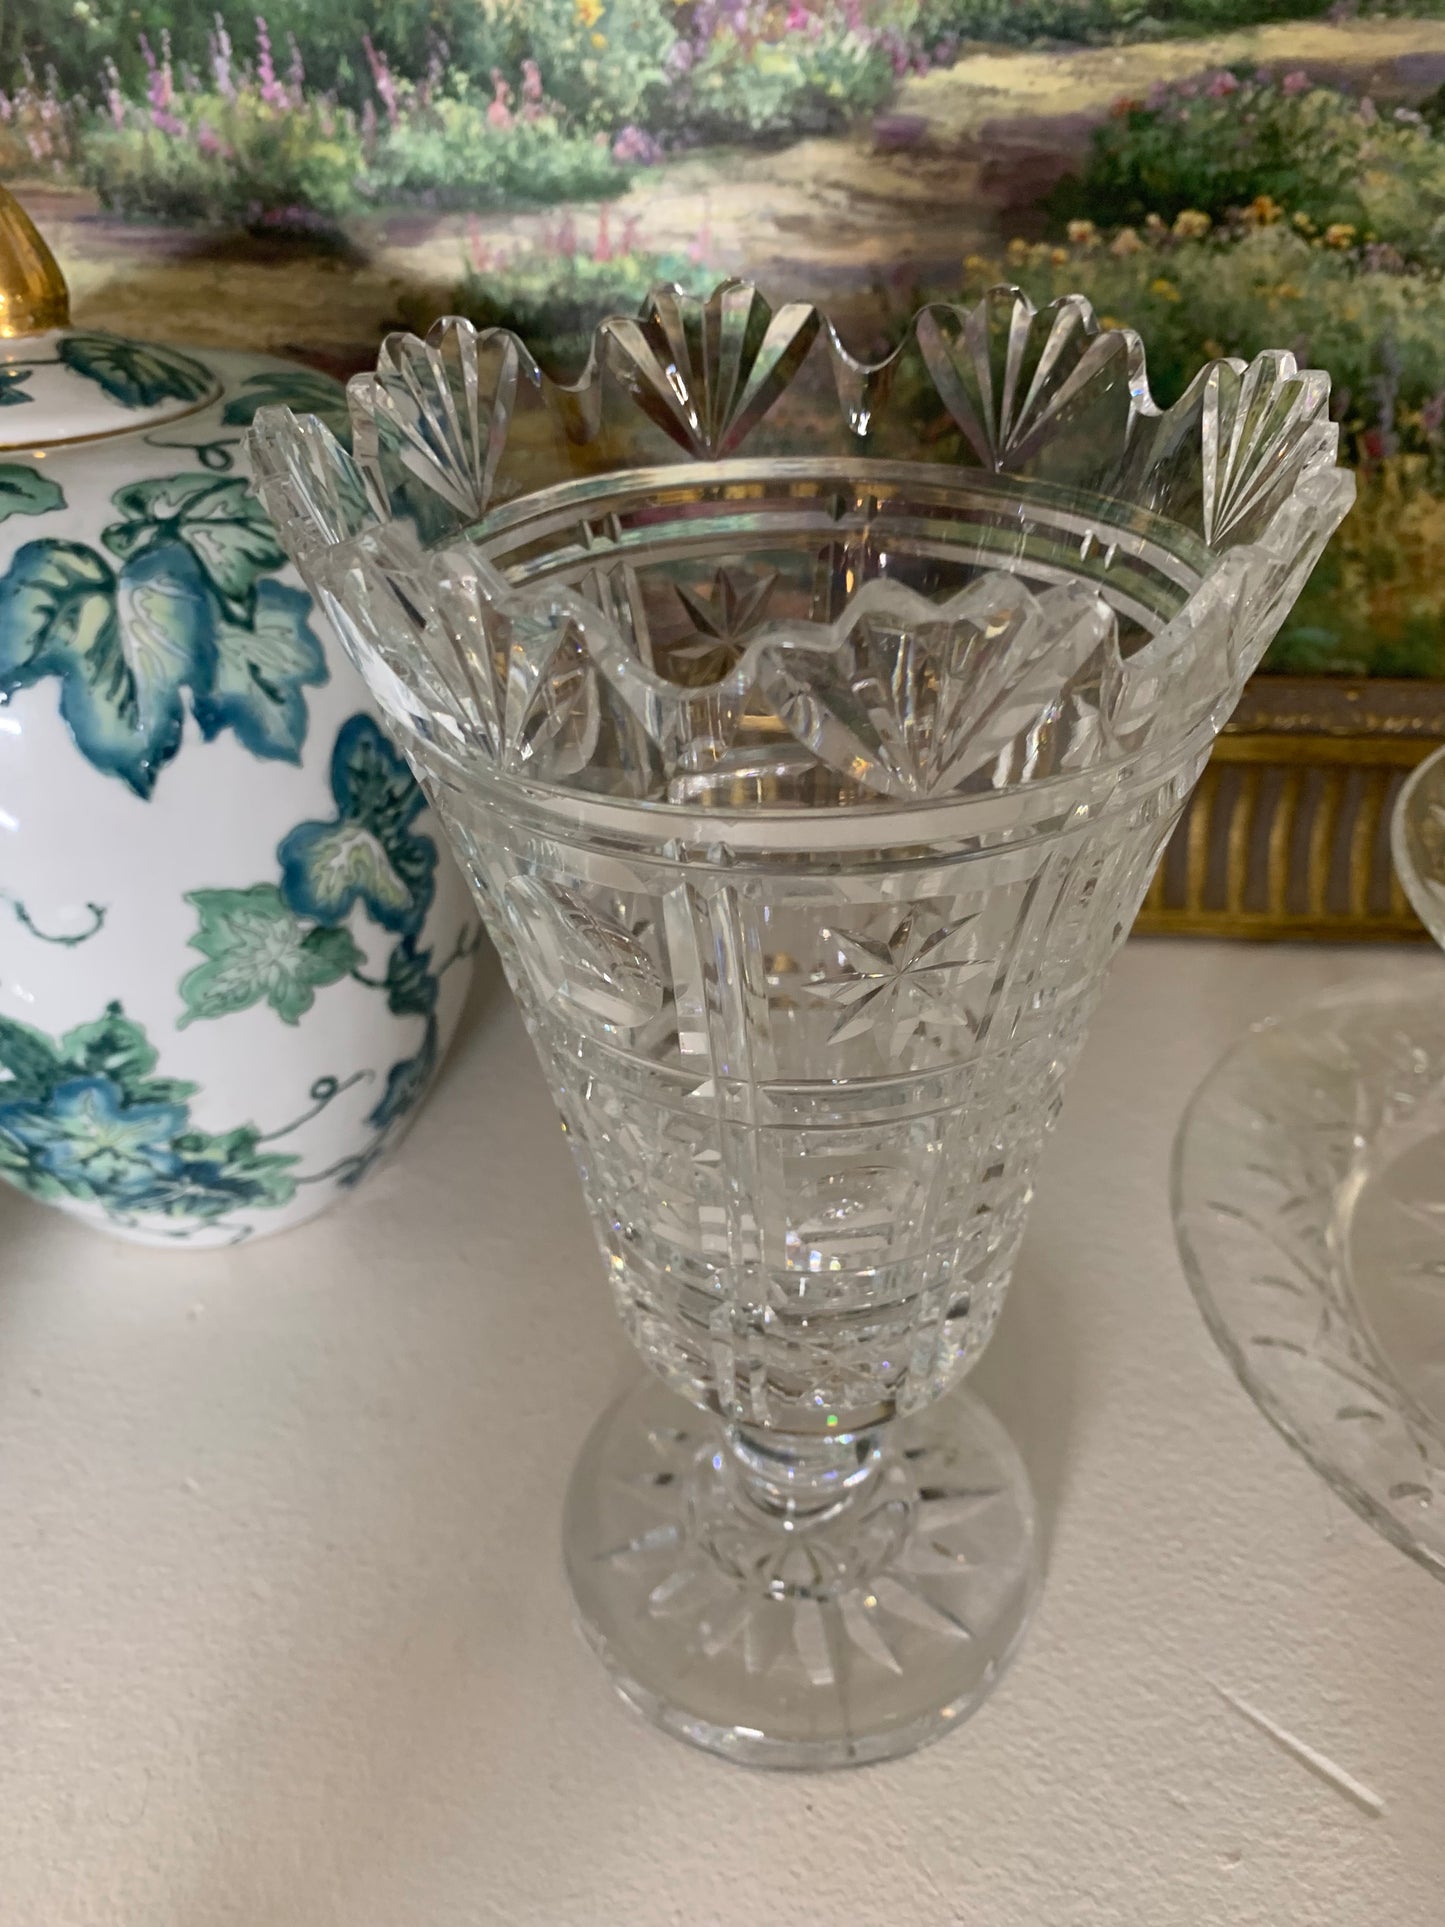 Stunning Waterford crystal footed 10” vase with scalloped rim and intricate cut details!